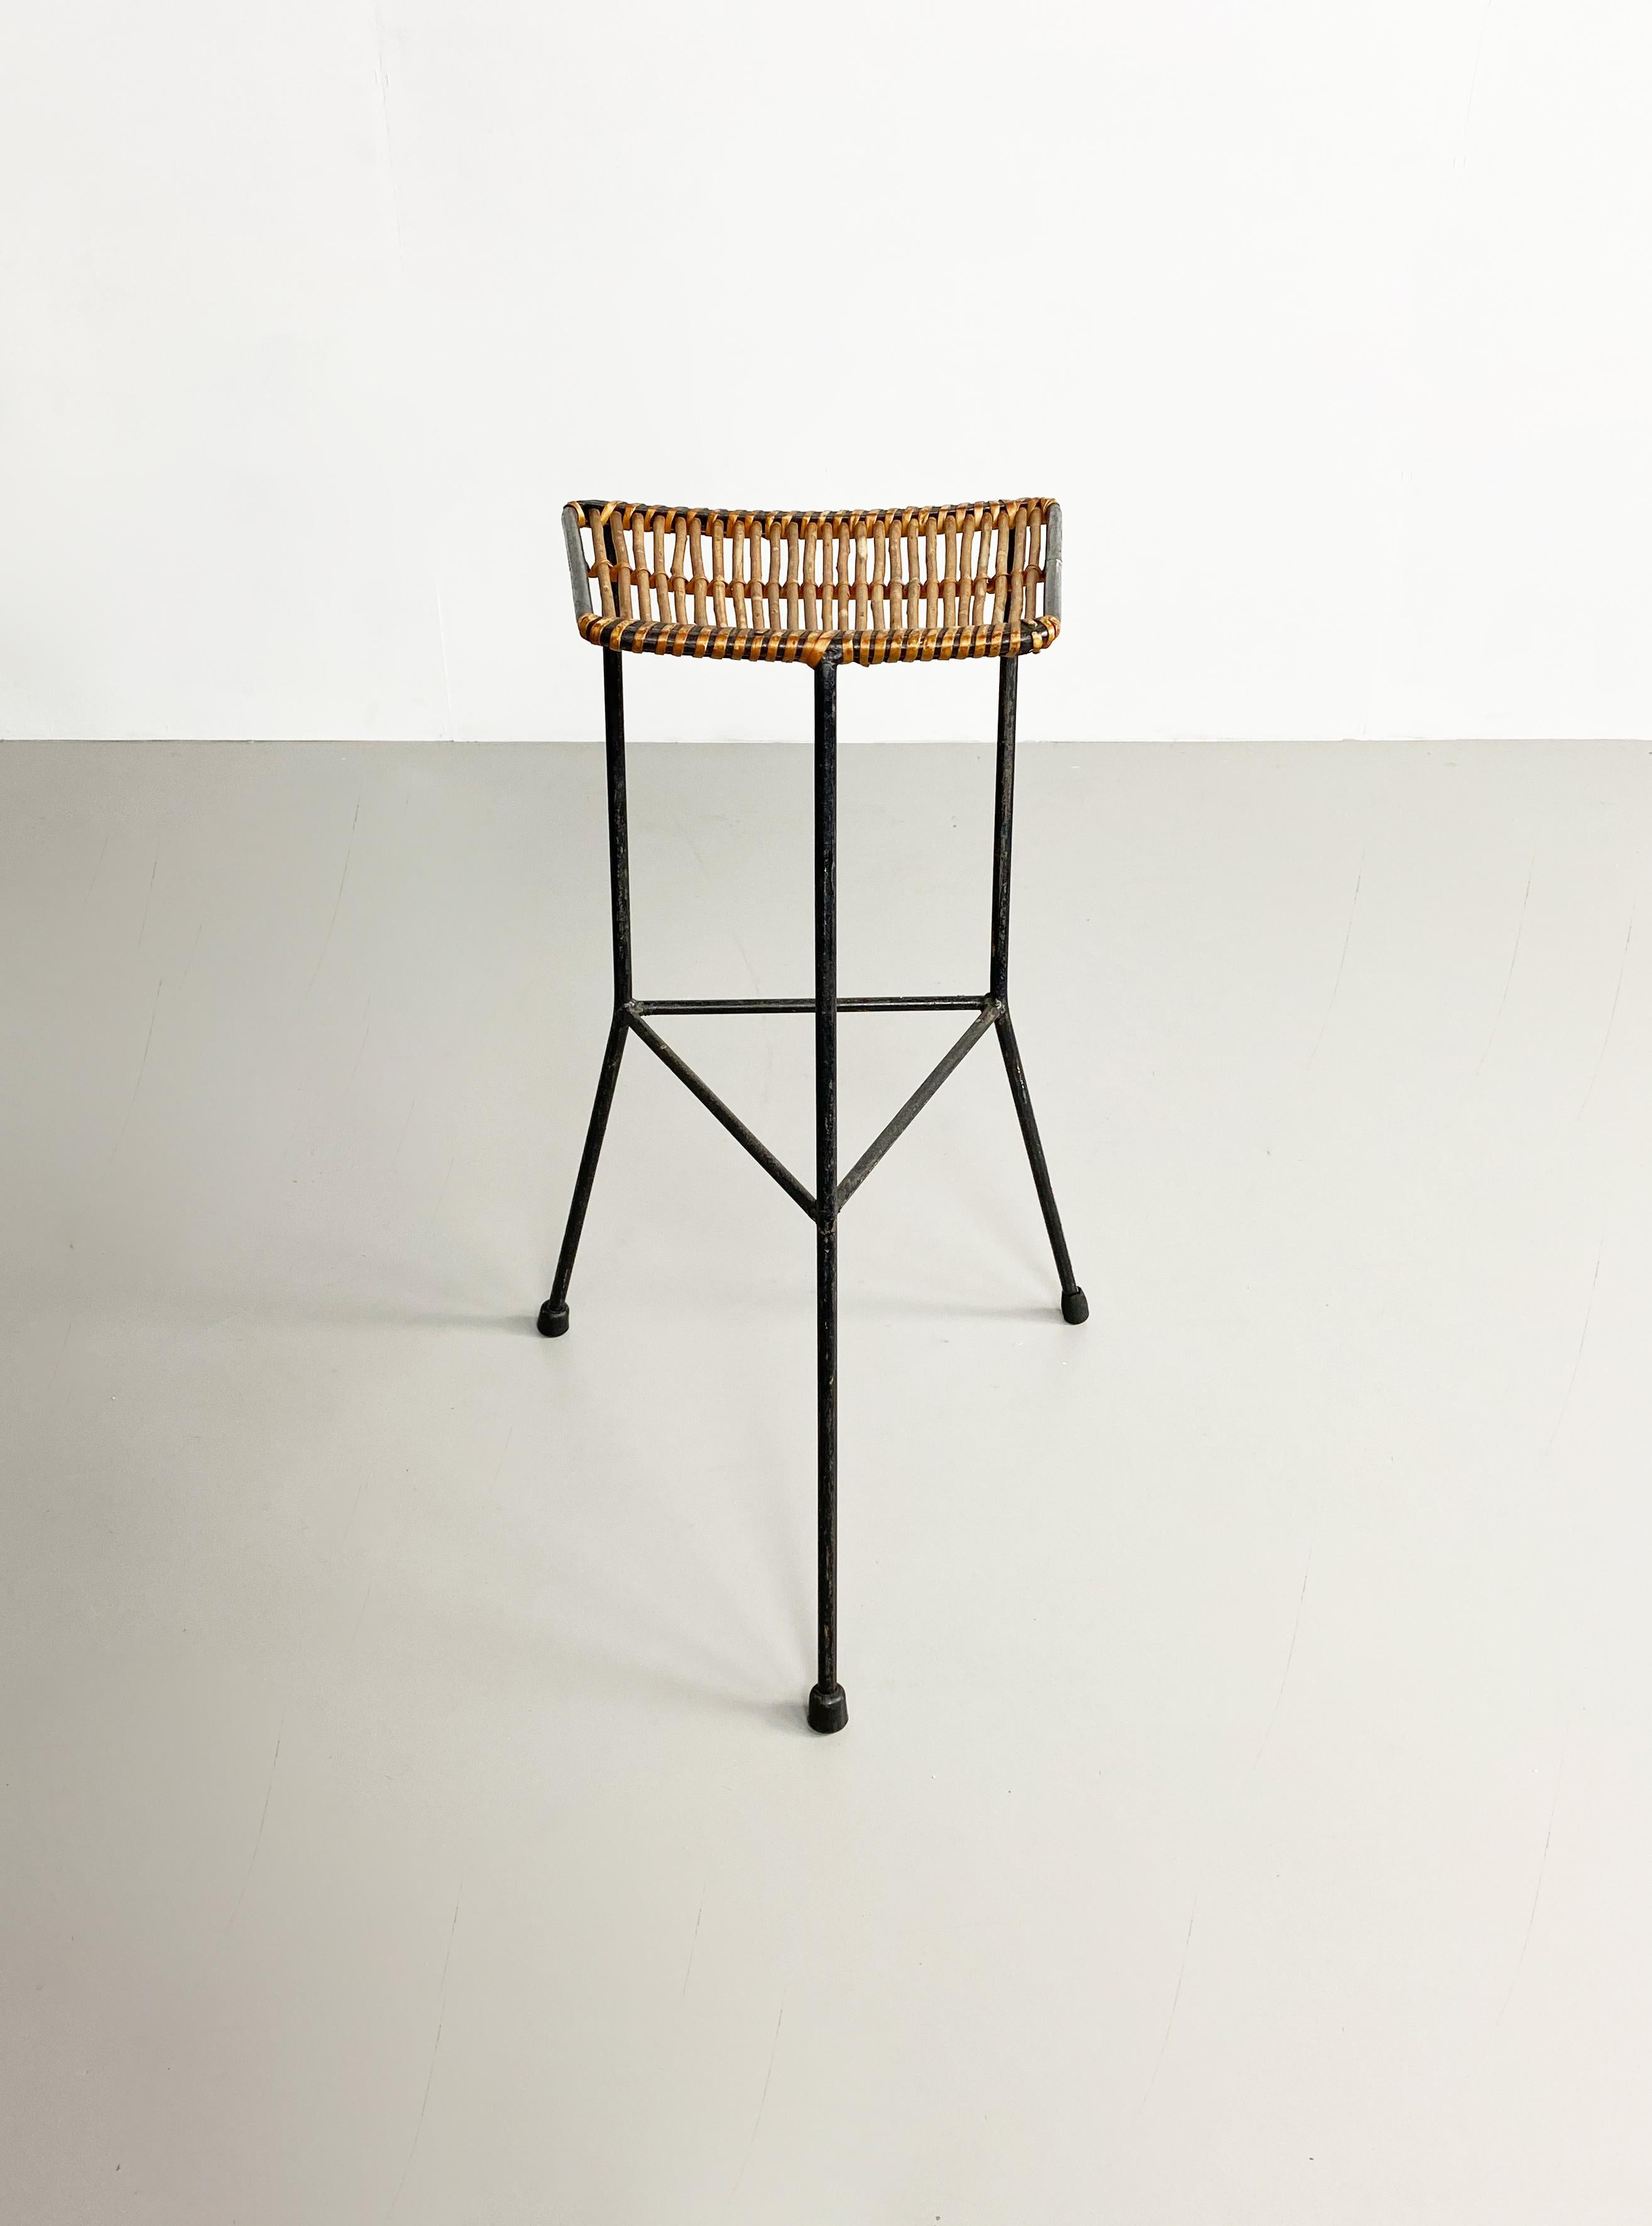 Rare three legged iron and rattan stool designed by Dennis Lennon in the 1950s.

Dimensions (cm, approx) 
Height: 70 
Width: 48 
Depth: 48